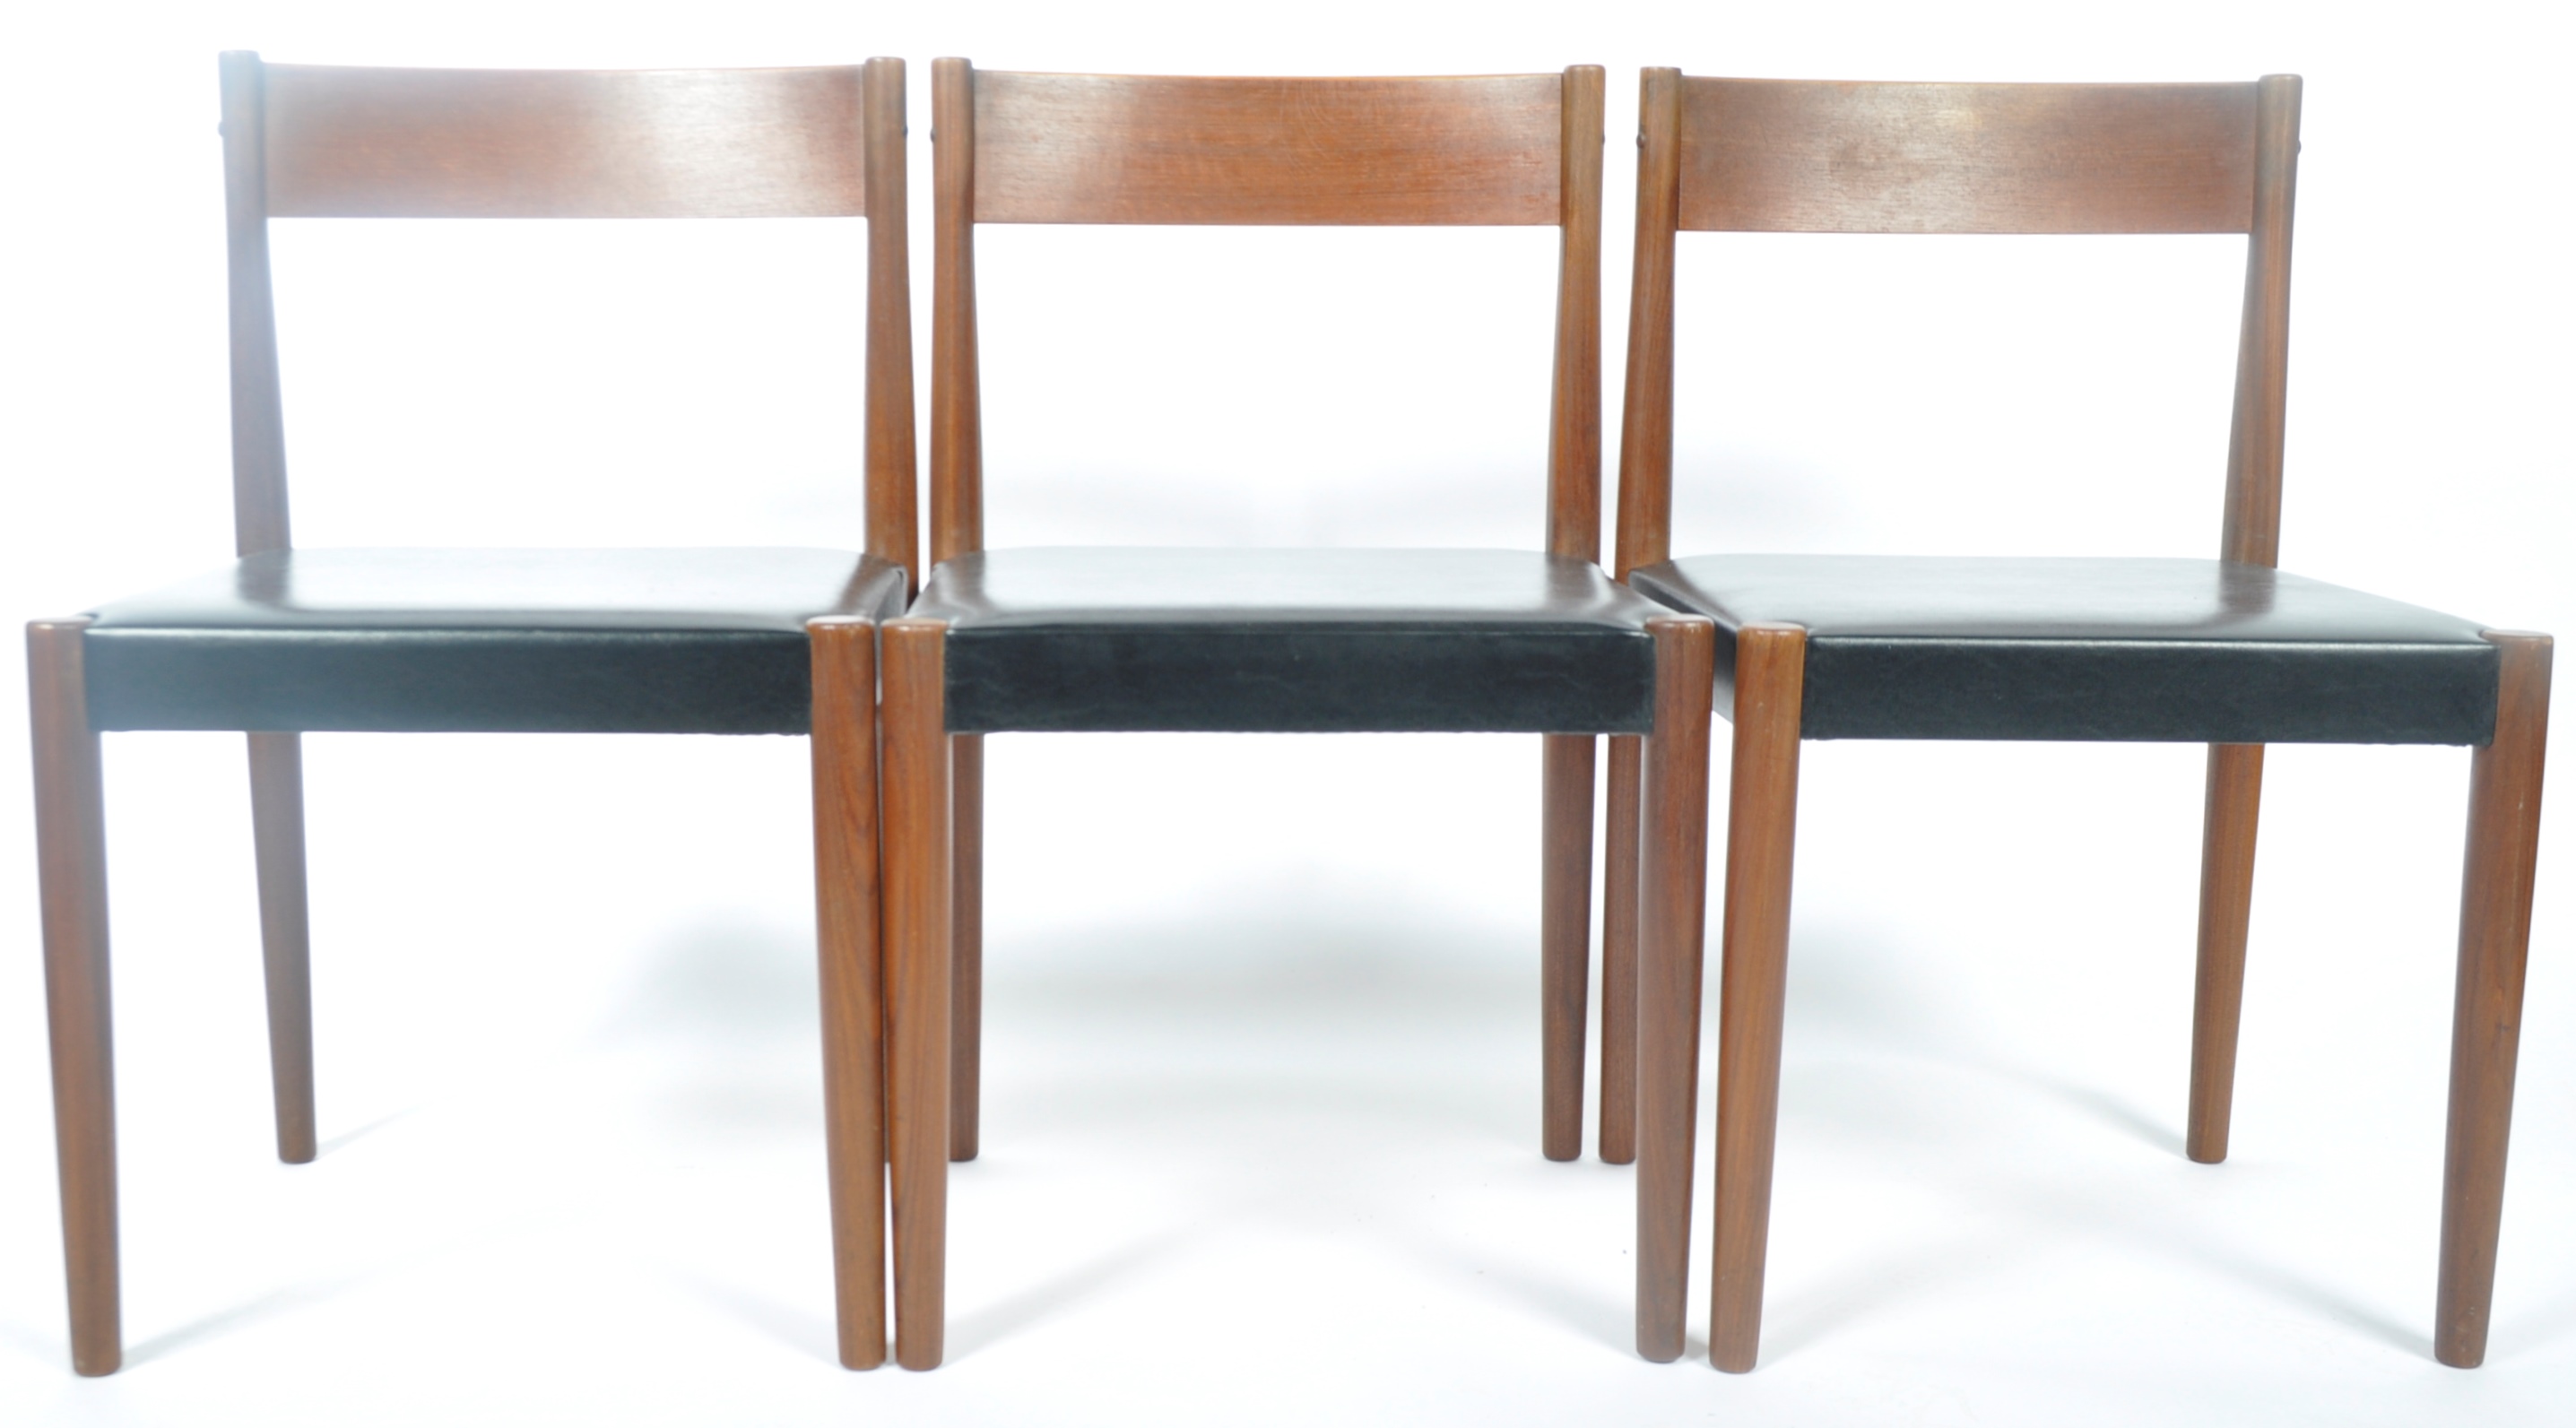 POUL VOLTHER FOR FREM ROJLE MATCHING SET OF SIX CHAIRS - Image 2 of 7